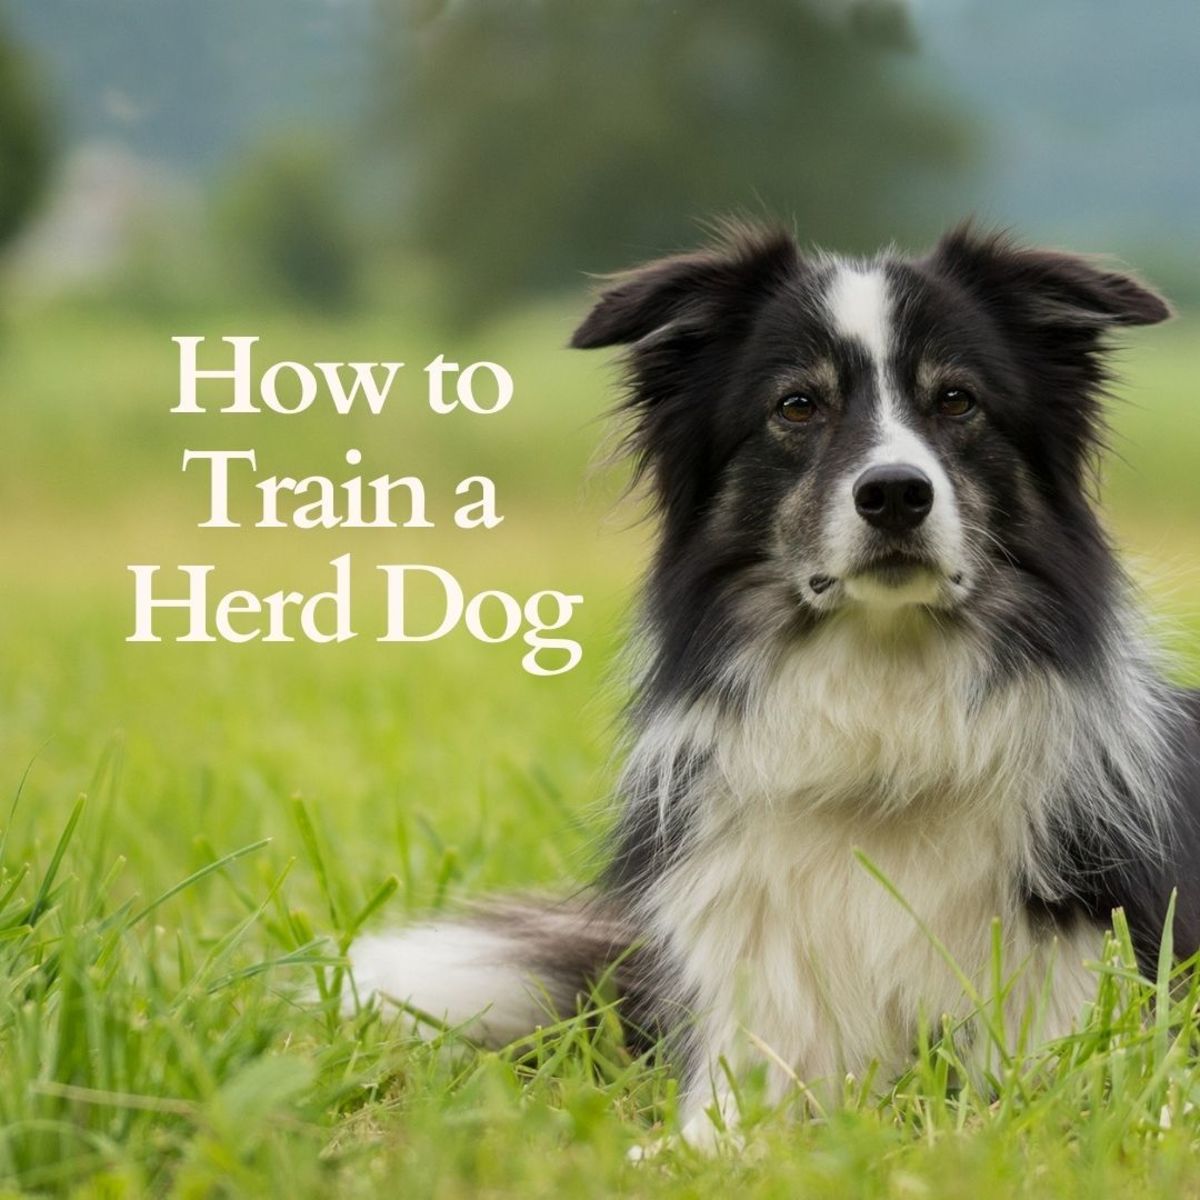 How to train dogs to herd